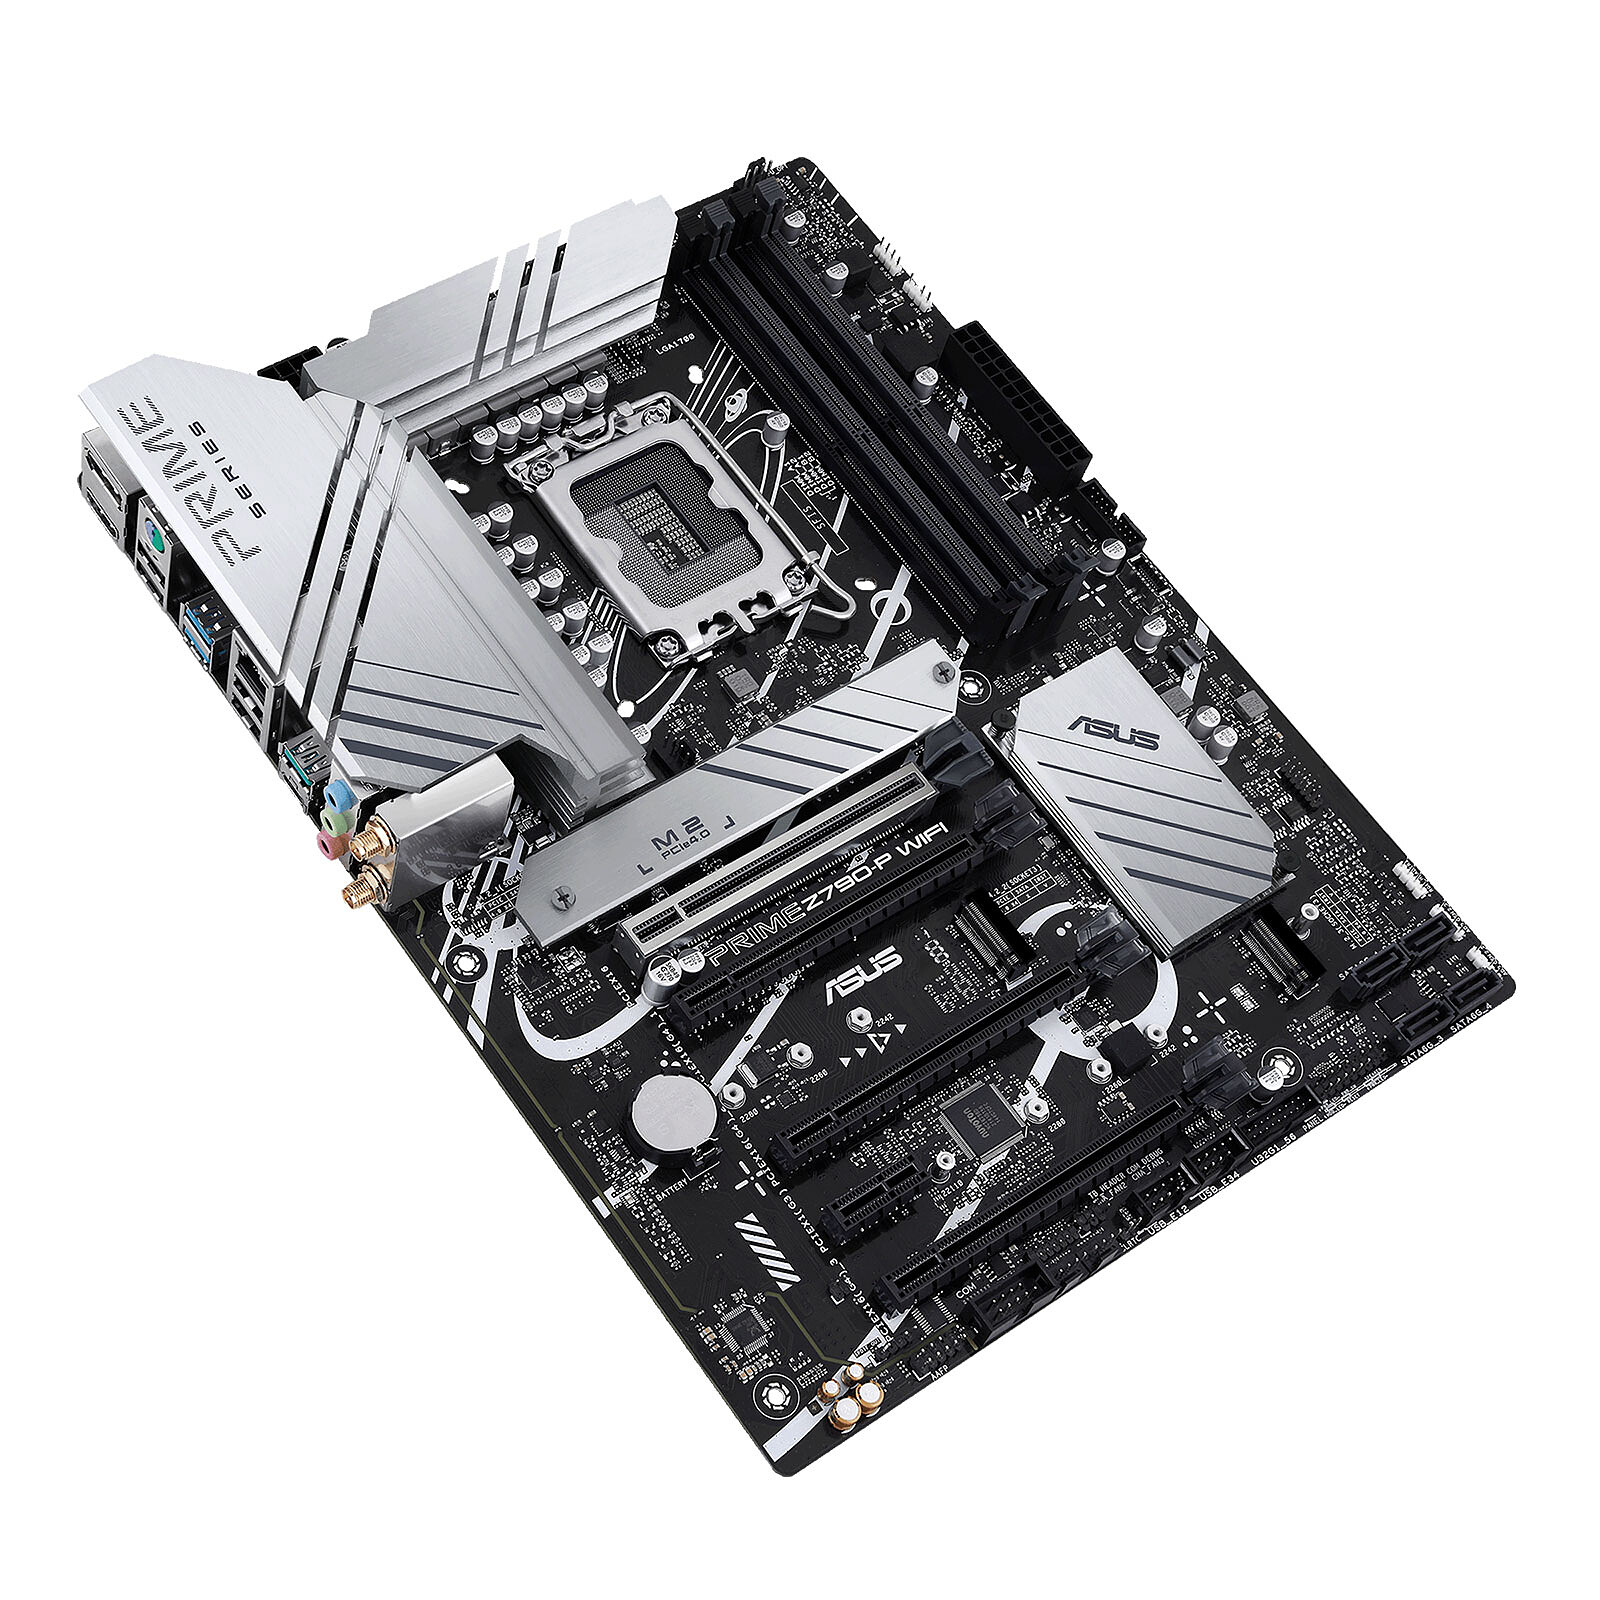 PRIME Z790-A WIFI｜Motherboards｜ASUS Global